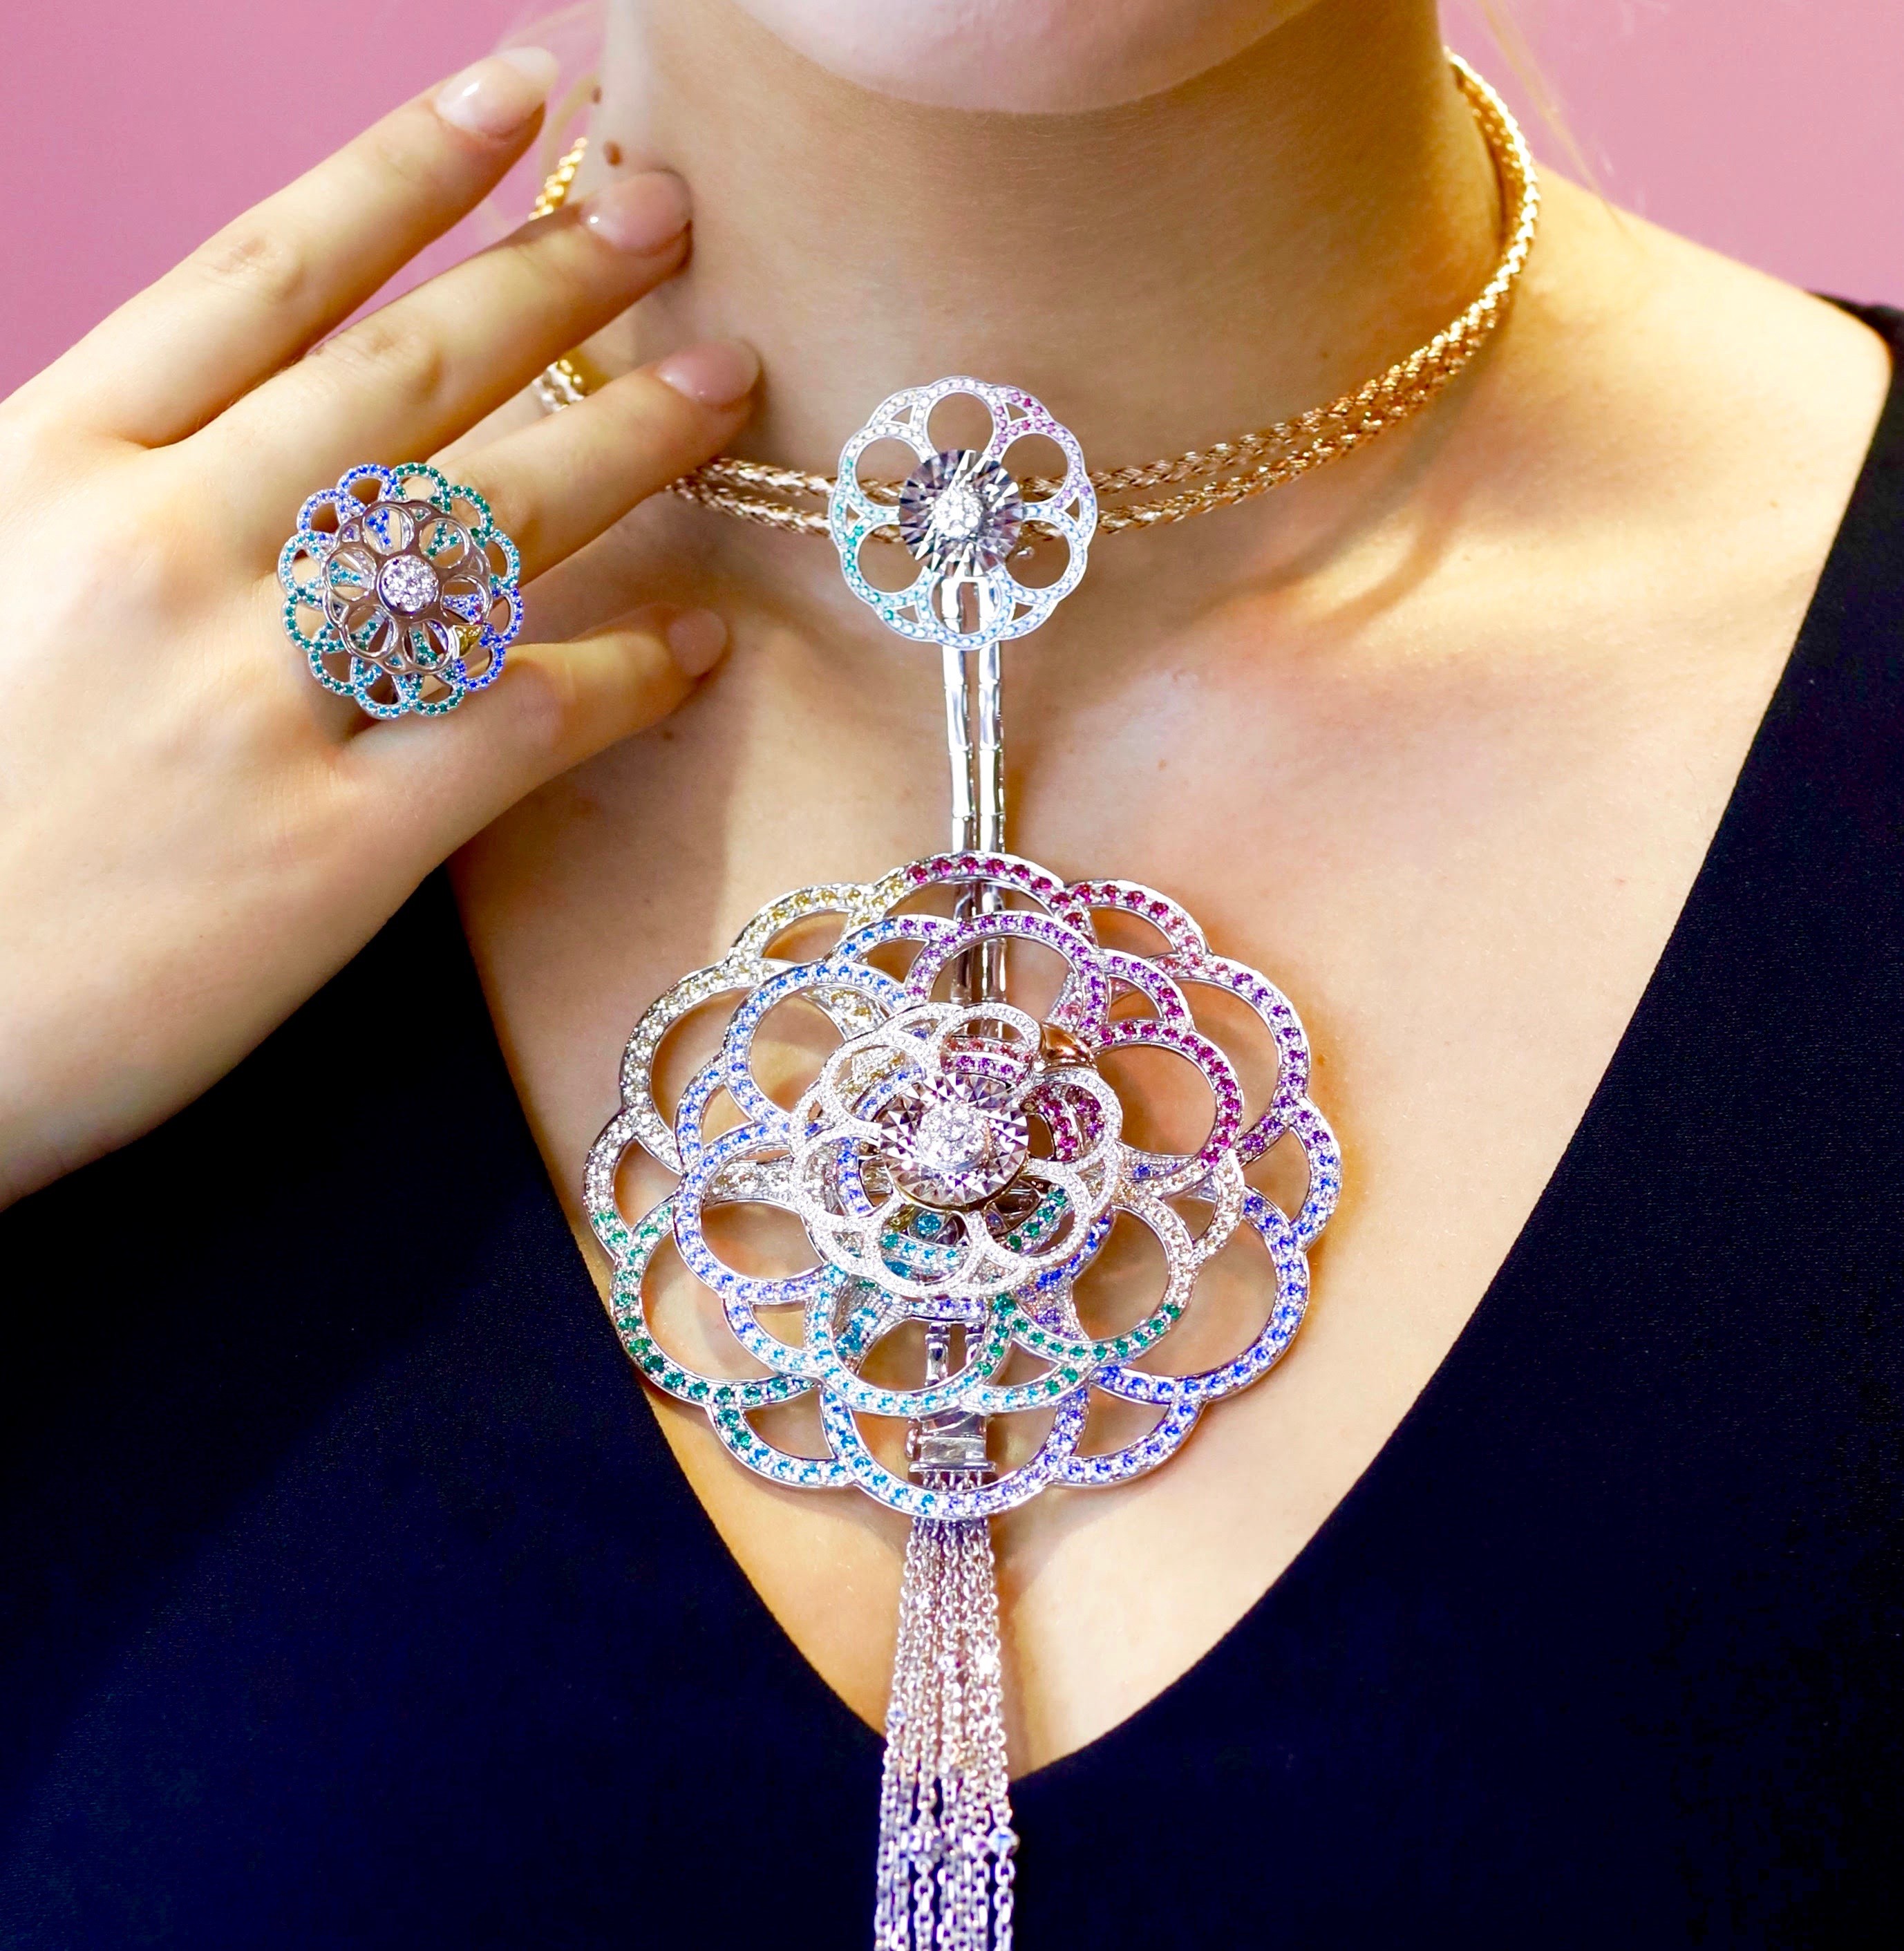 Coronet By Reena Ahluwalia Soul Carousel spinning jewellery collection necklace and ring